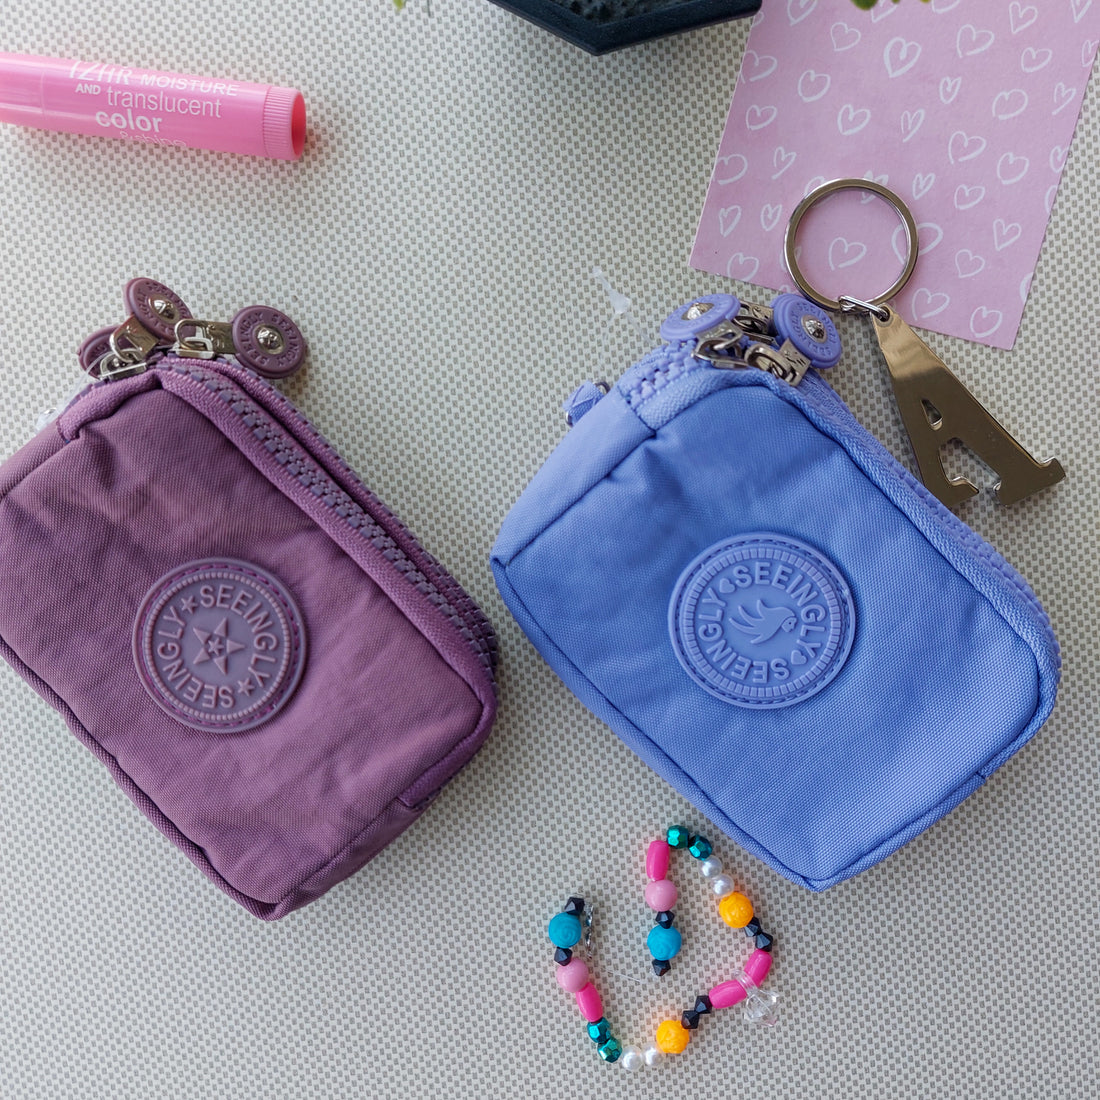 Seeingly Small Pouches Mauve and Purple - 3 Zip